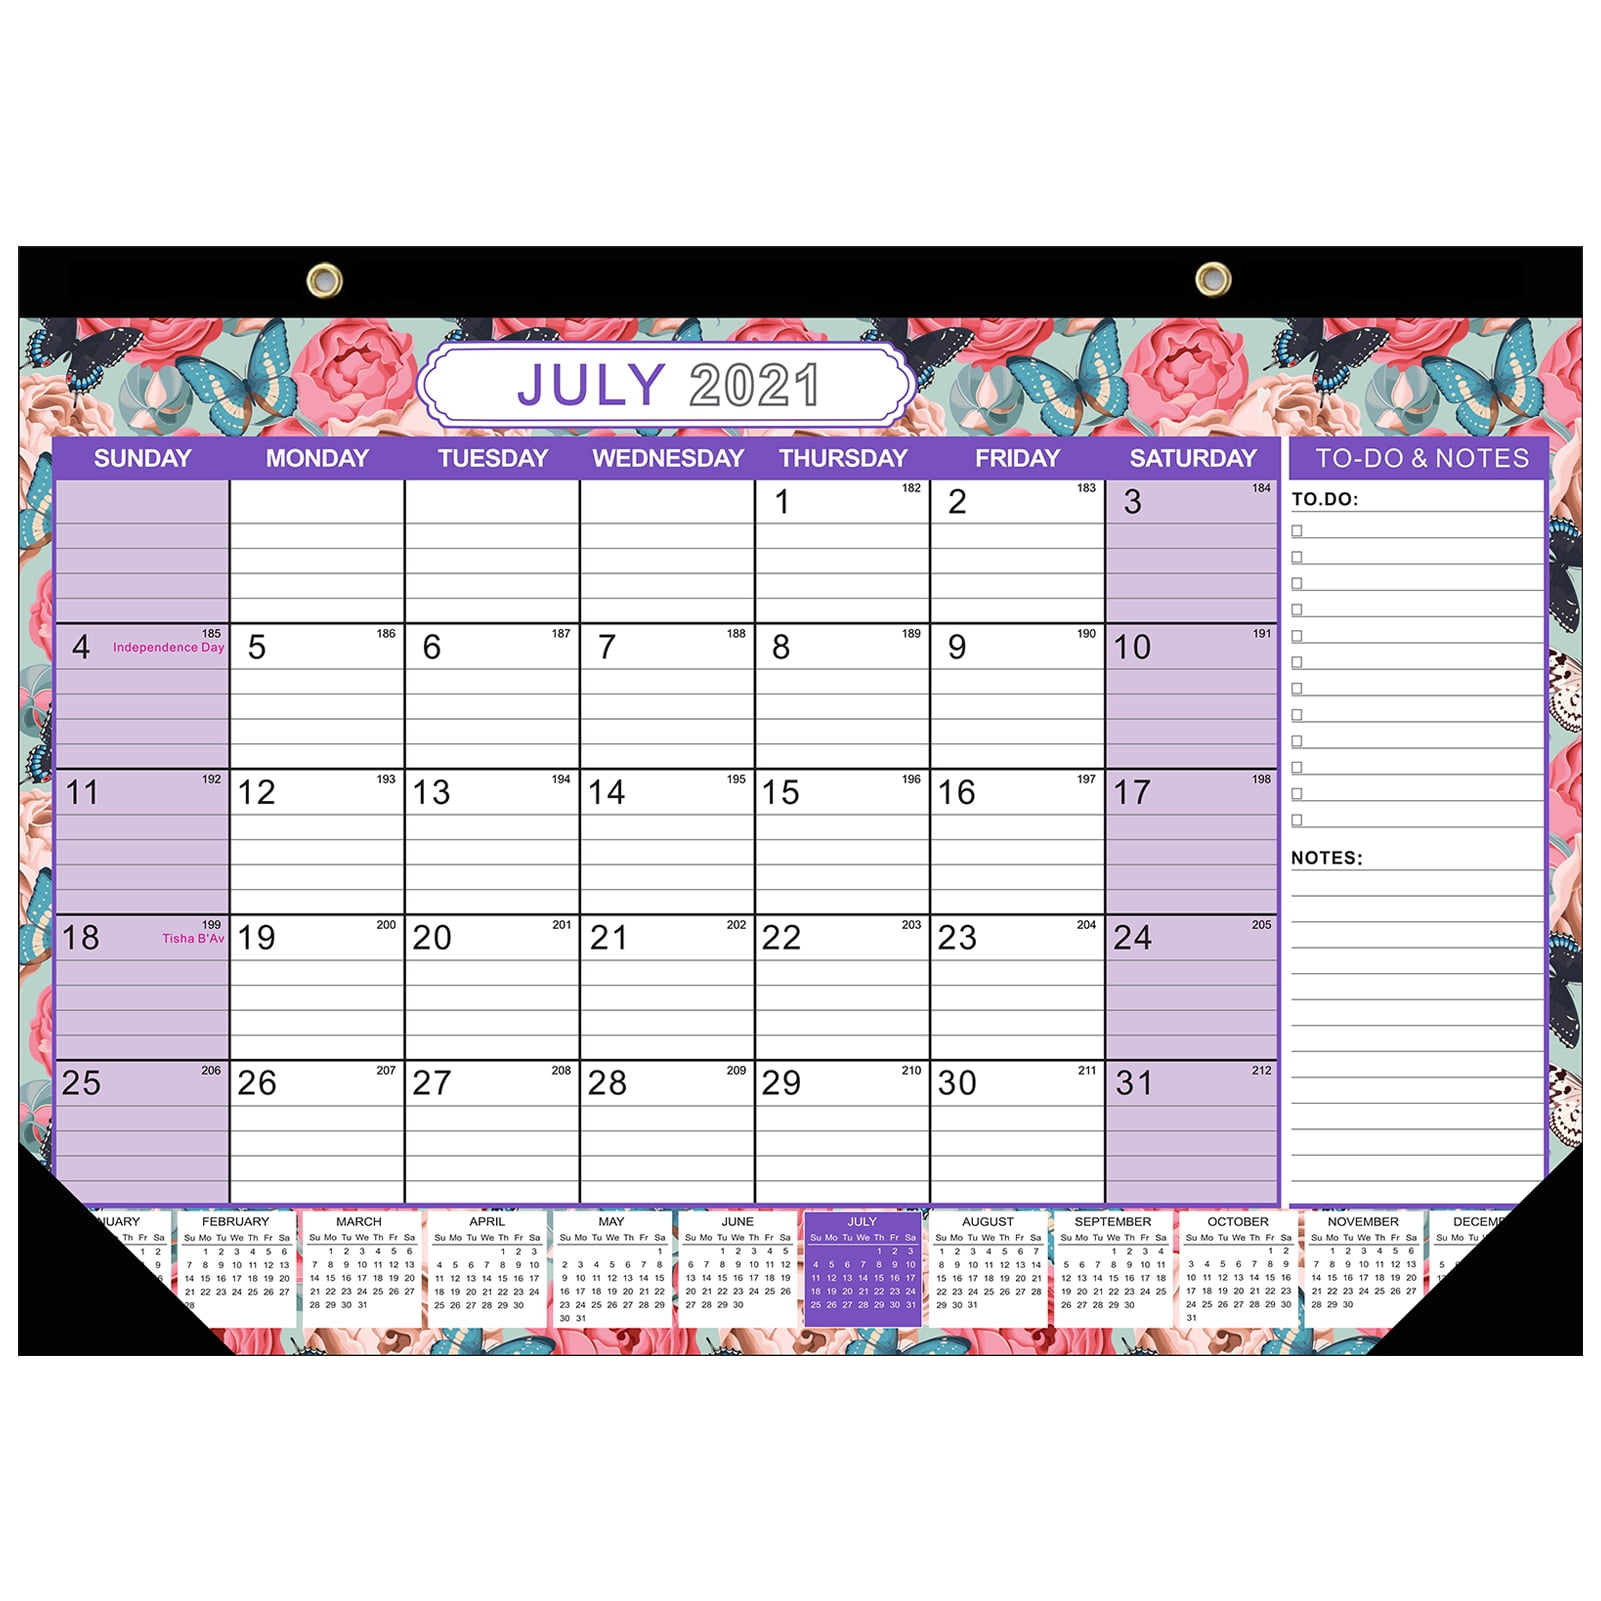 12 x 17 Calendar 2021-2022 December 2022 Ruled Space with Julian Dates July 2021 Twin-Wire Binding Perfect for Planning and Organizing Your Home and Office 18 Months Wall Calendar 2021-2022 